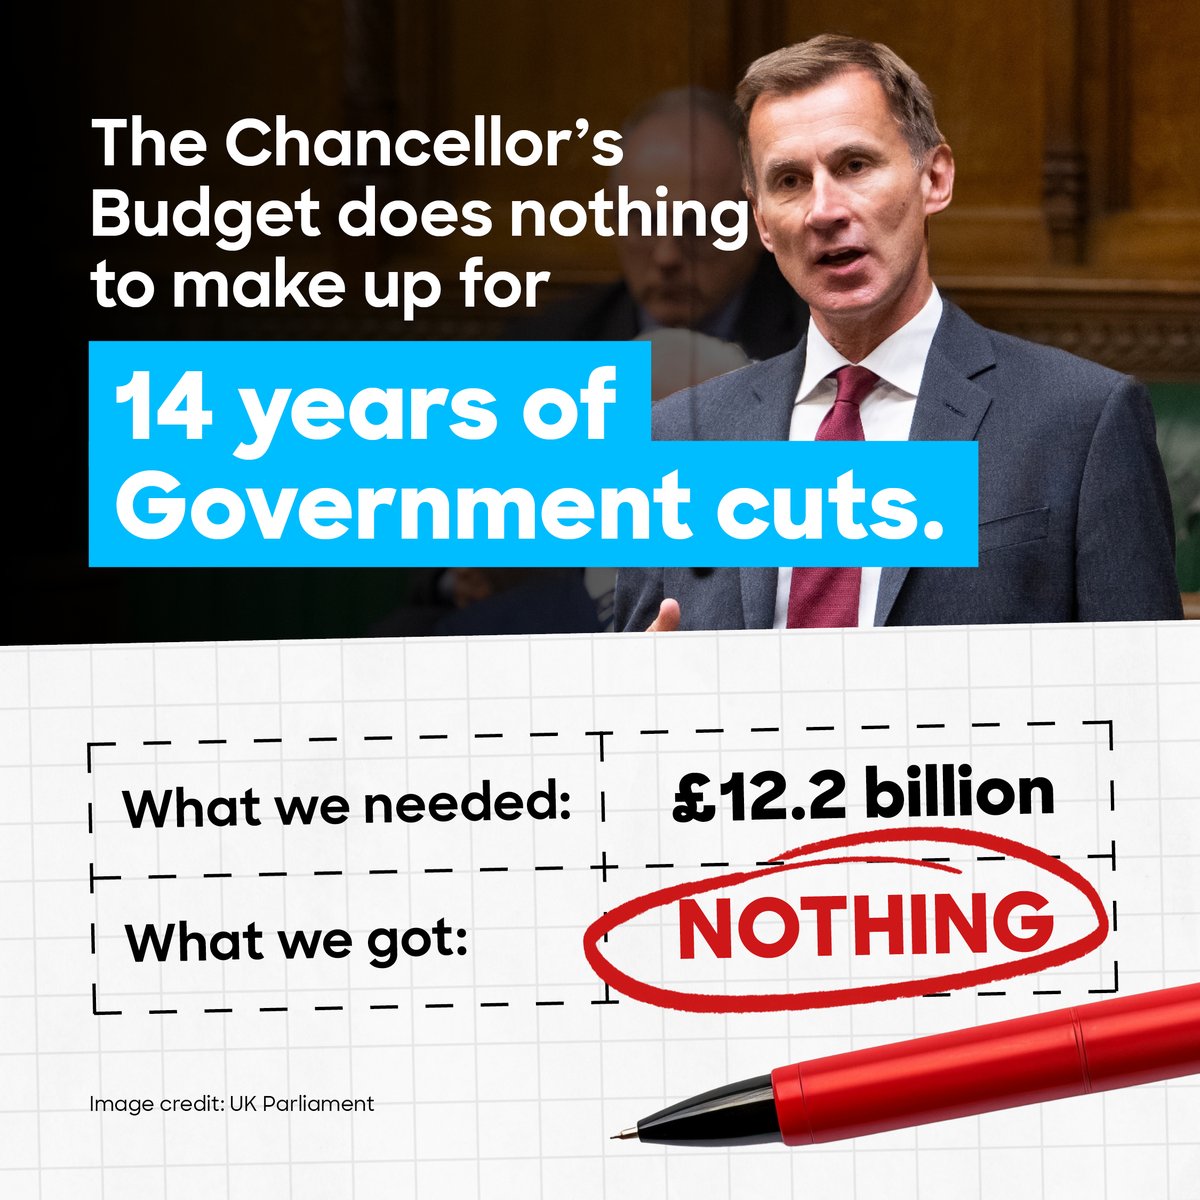 Yesterday's Spring Budget was a massive missed opportunity to commit to education. Schools needed £12.2 billion just to start reversing the impact of 14 years of Government cuts. Instead, Chancellor Jeremy Hunt has committed nothing to reverse the cuts. He’s allocated just…